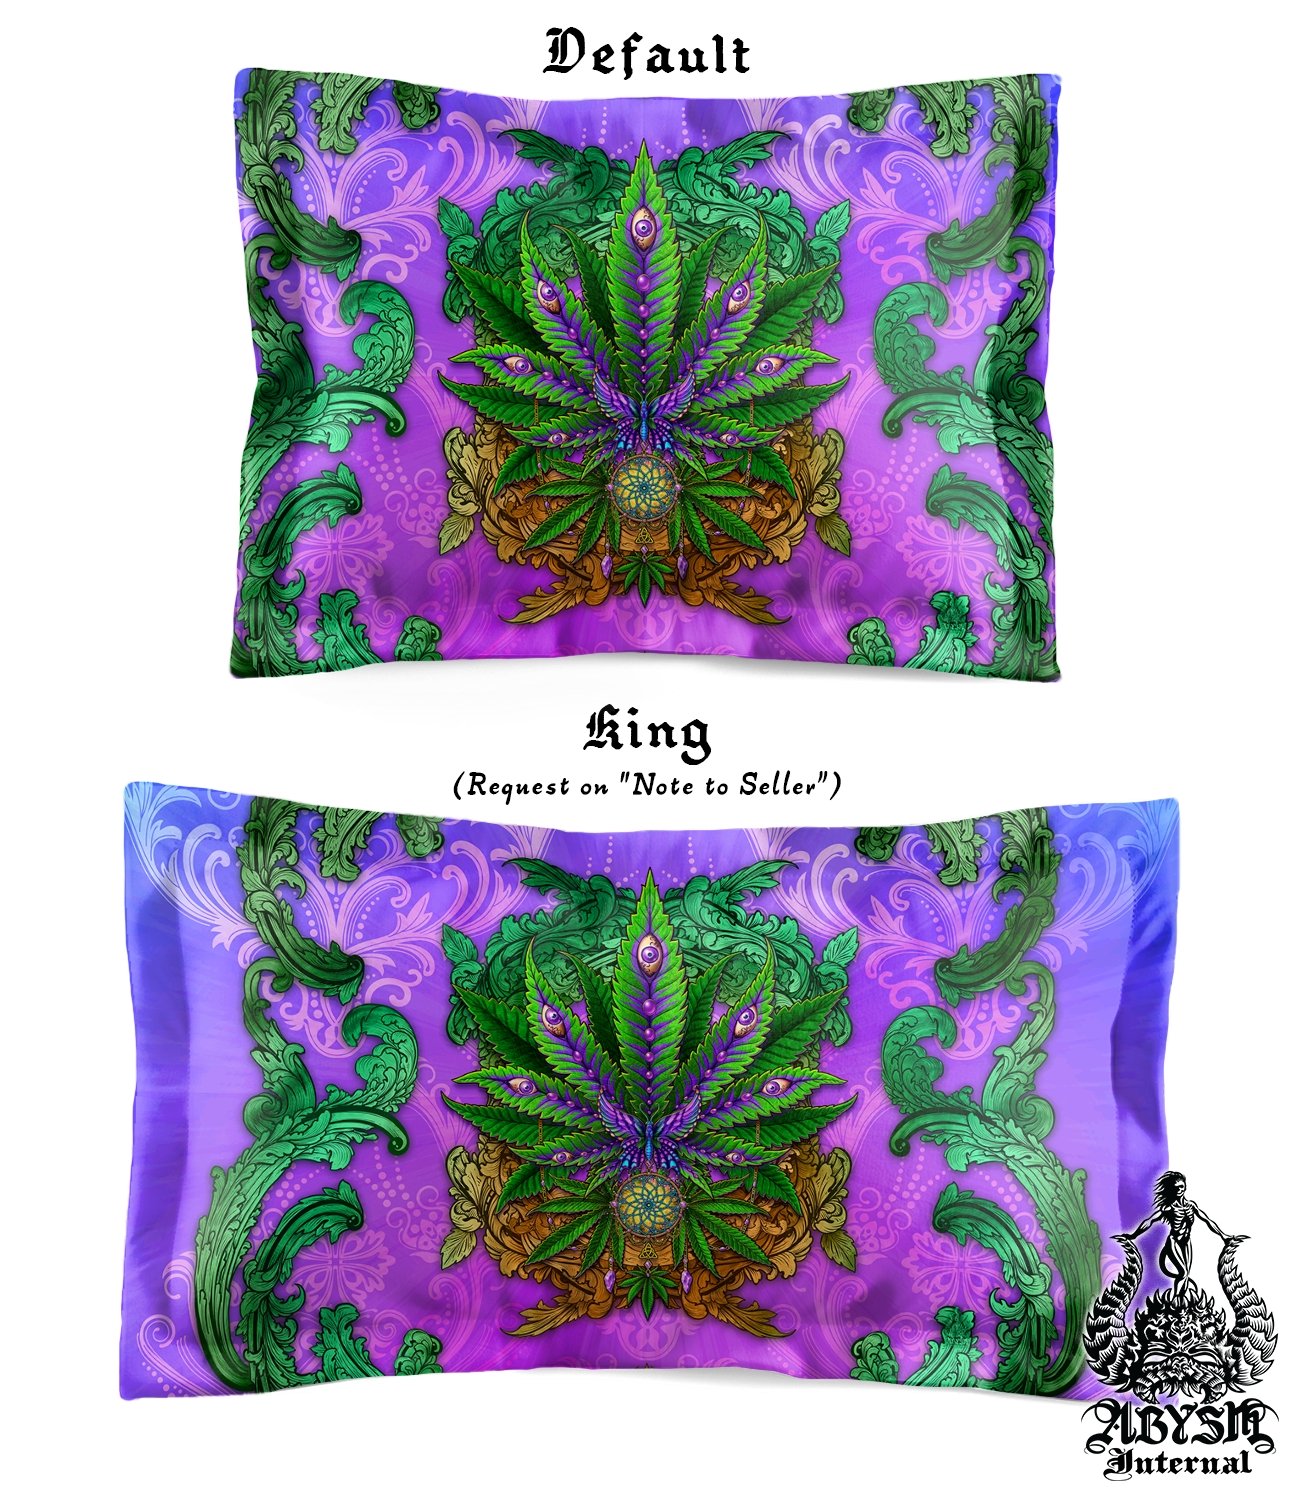 Weed Bedding Set, Comforter and Duvet, Cannabis Bed Cover, Marijuana Bedroom Decor, King, Queen and Twin Size, 420 Room Art - Nature - Abysm Internal